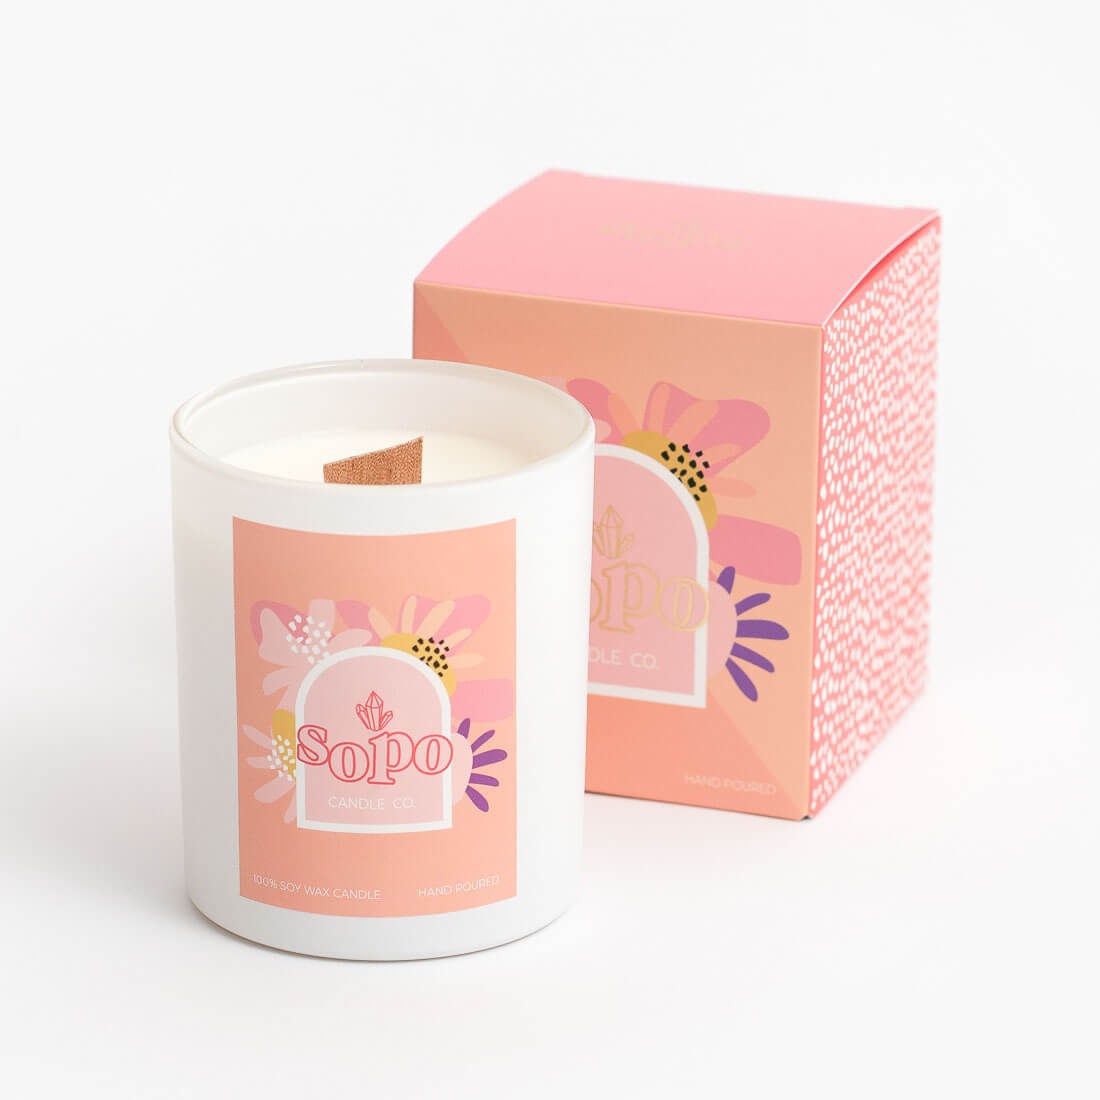 Sopo wood wick candle as a Geelong florist flower add-on